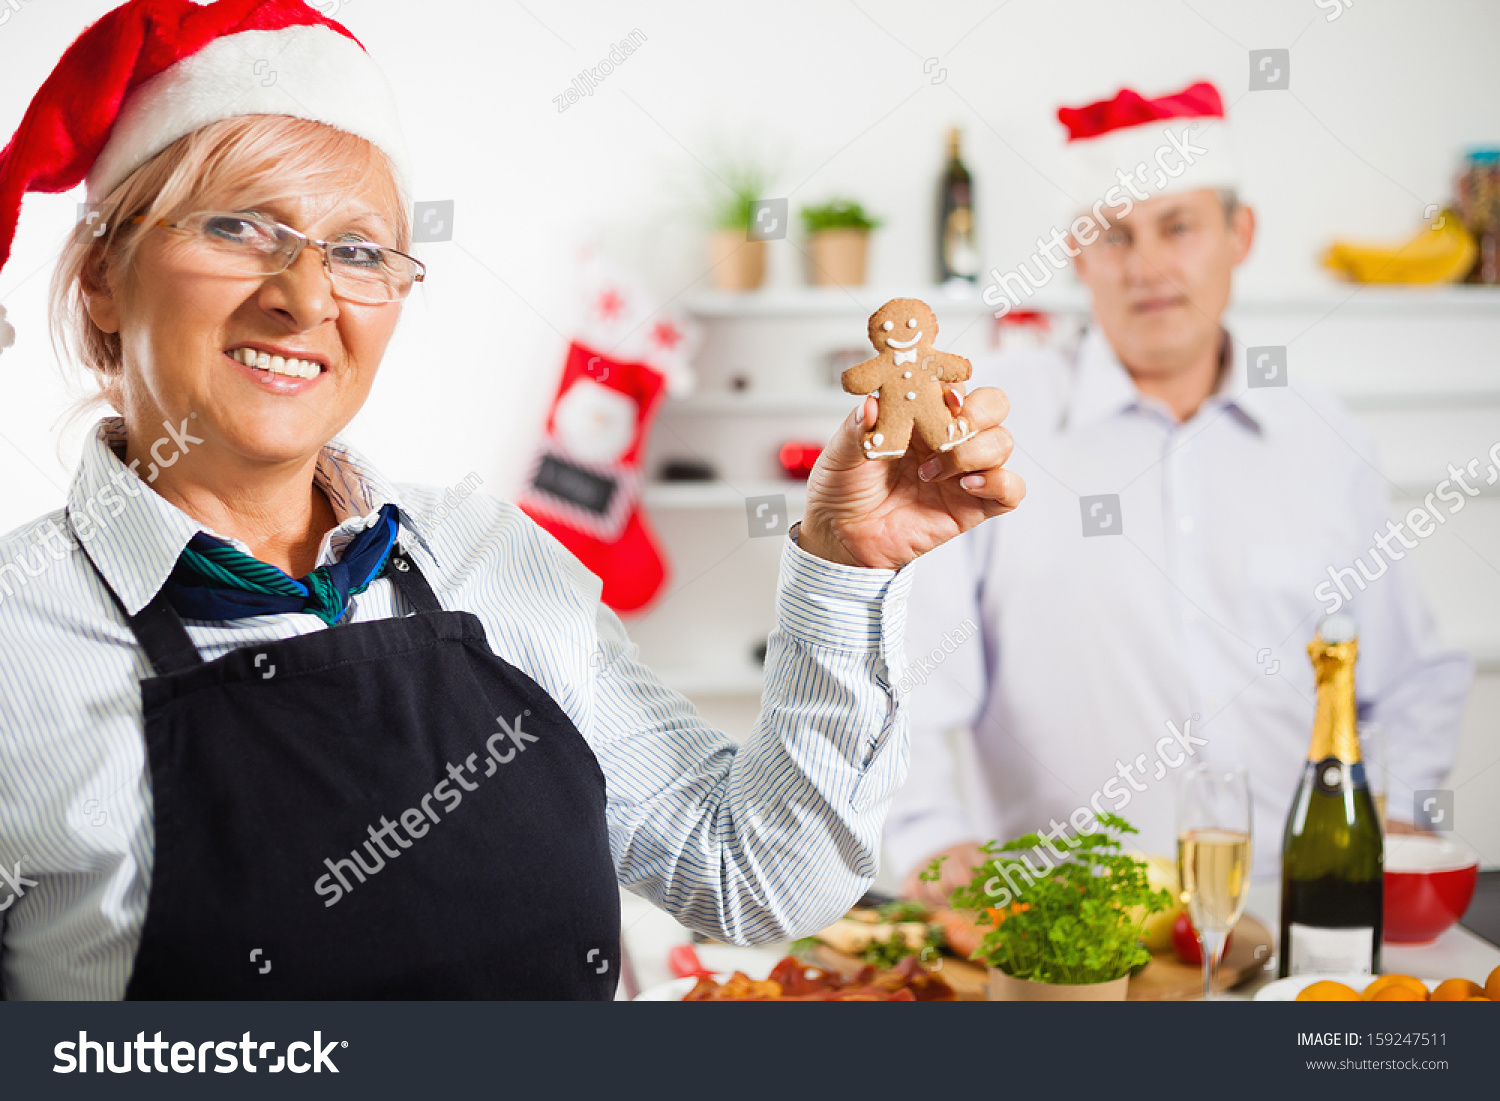 Happy Mature Couple Baking Christmas Cookies. Focus Is On Woman. Stock ...